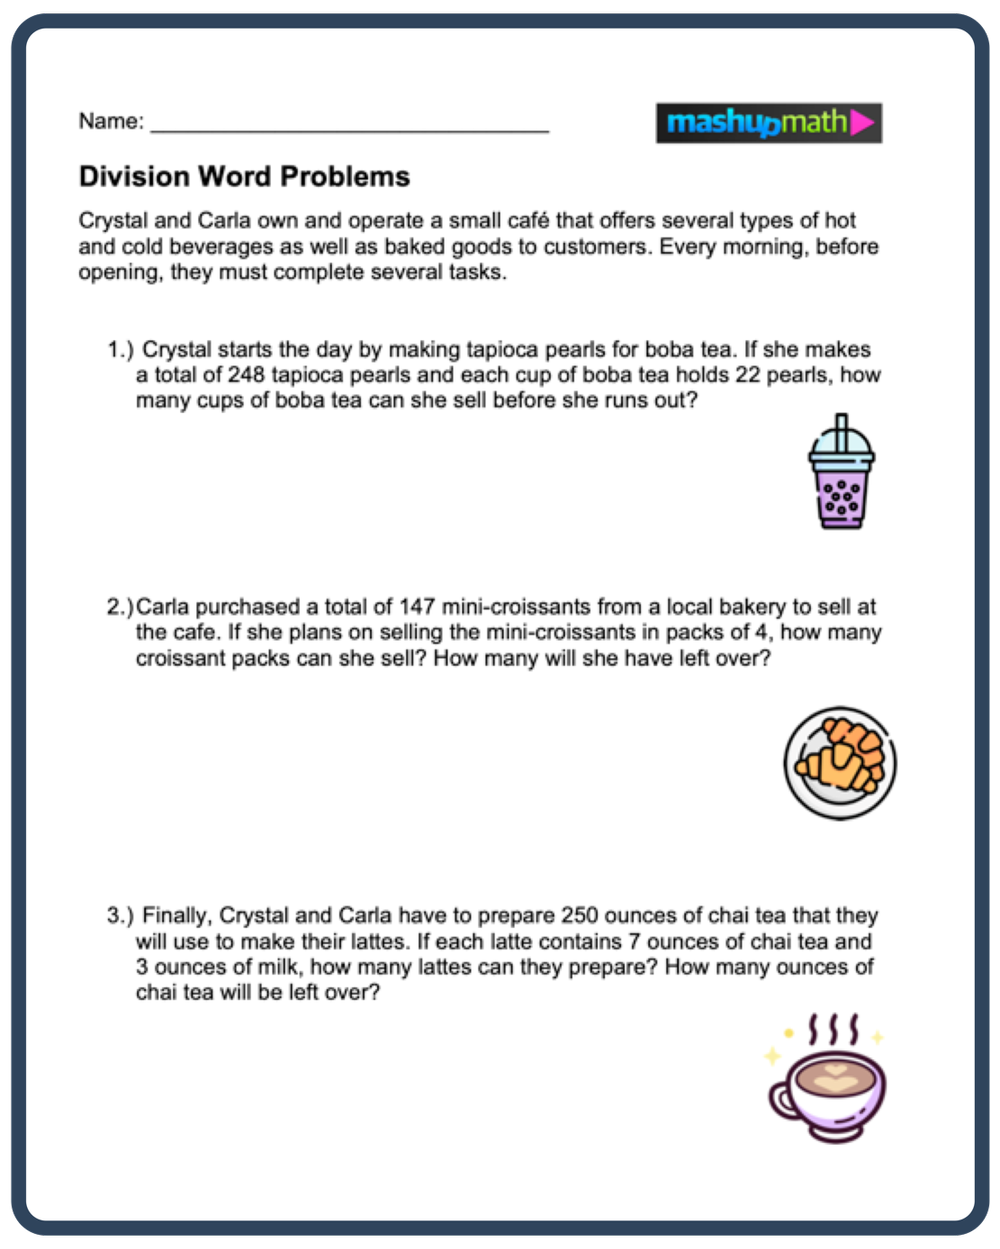 division-word-problems-free-worksheets-for-grades-3-5-mashup-math